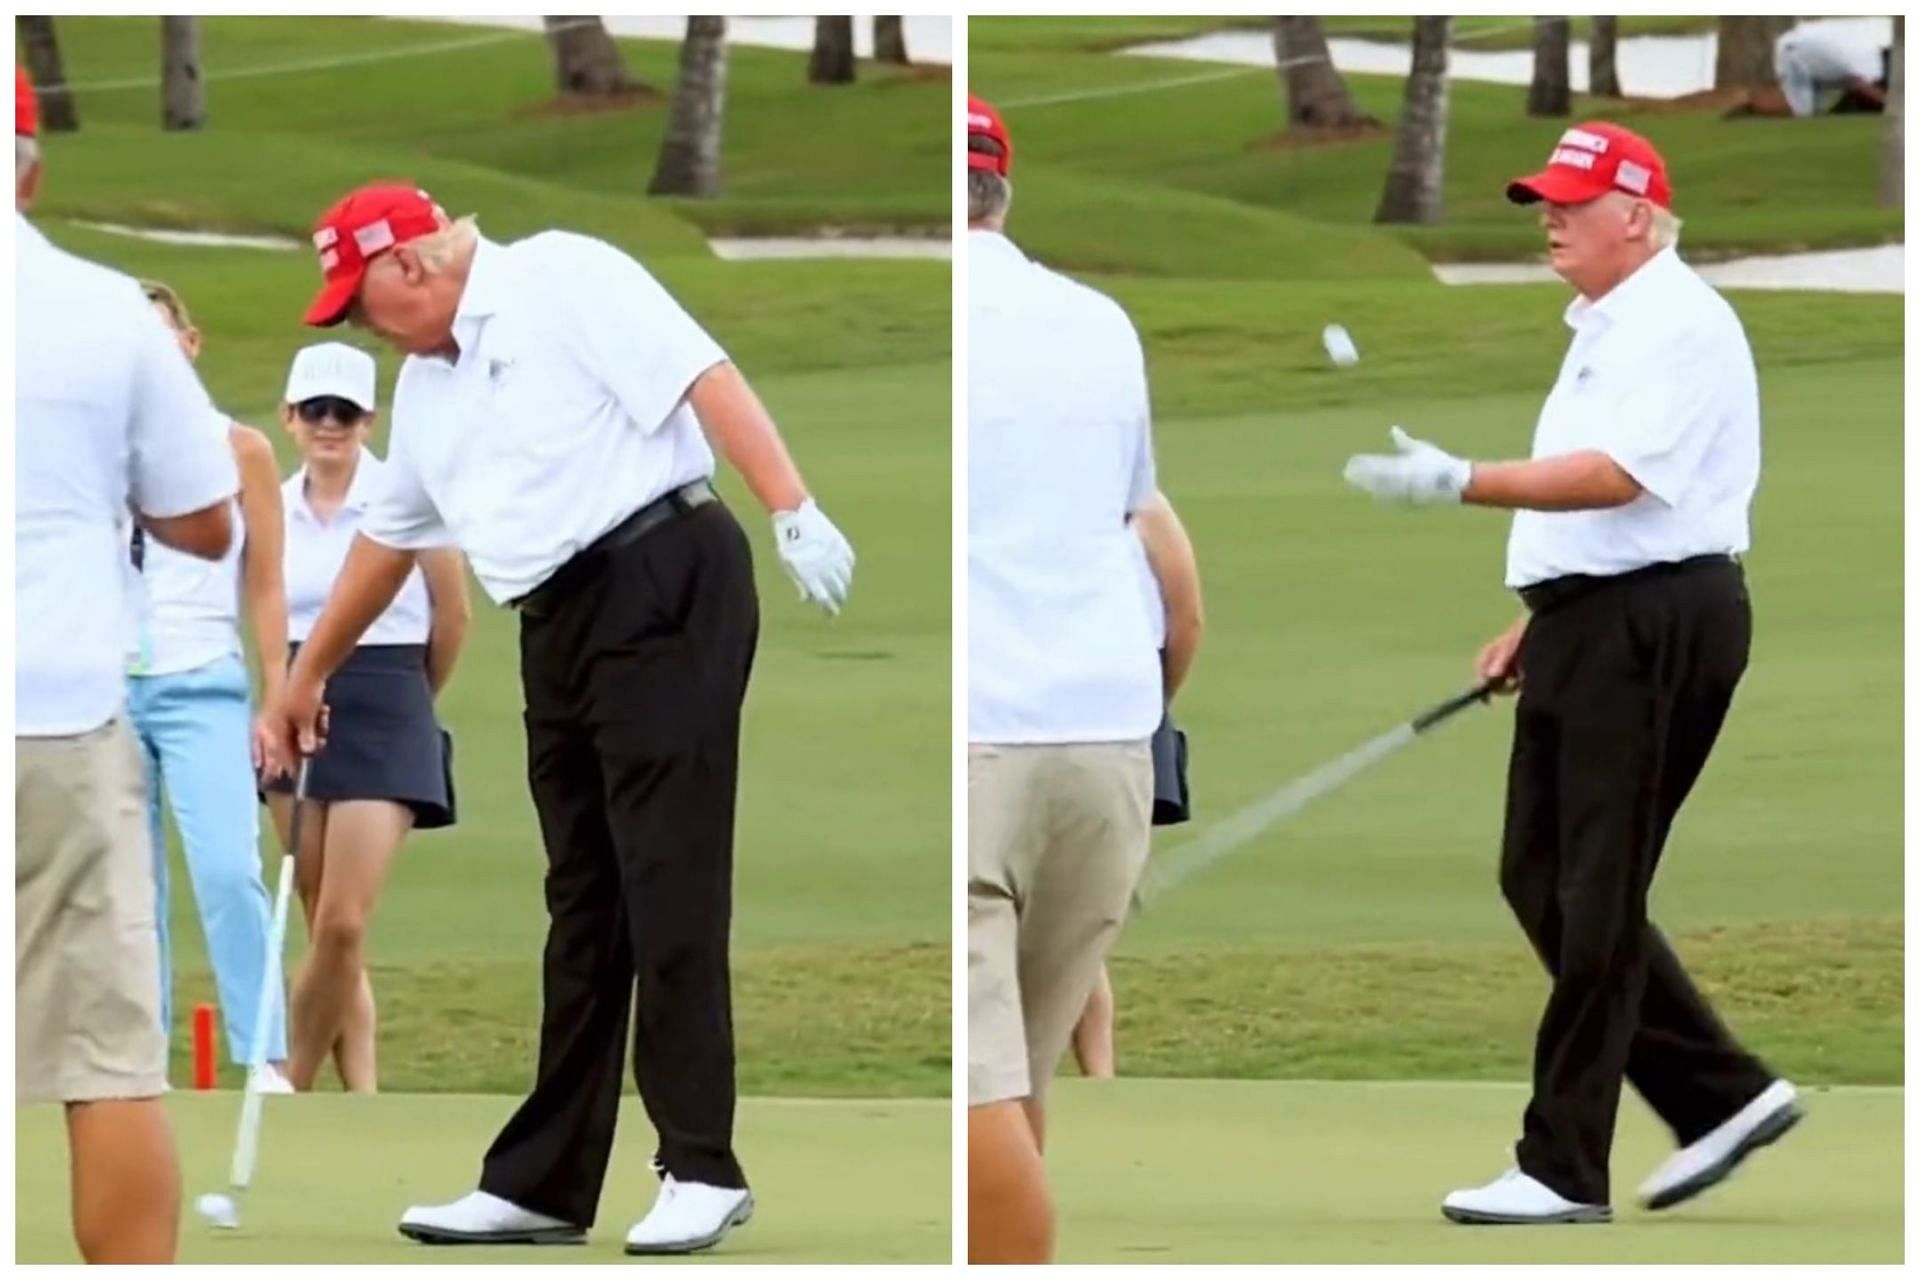 Donald Trump impressed fans with his little golf trick (Image via Twitter.com/_johnnymaga)